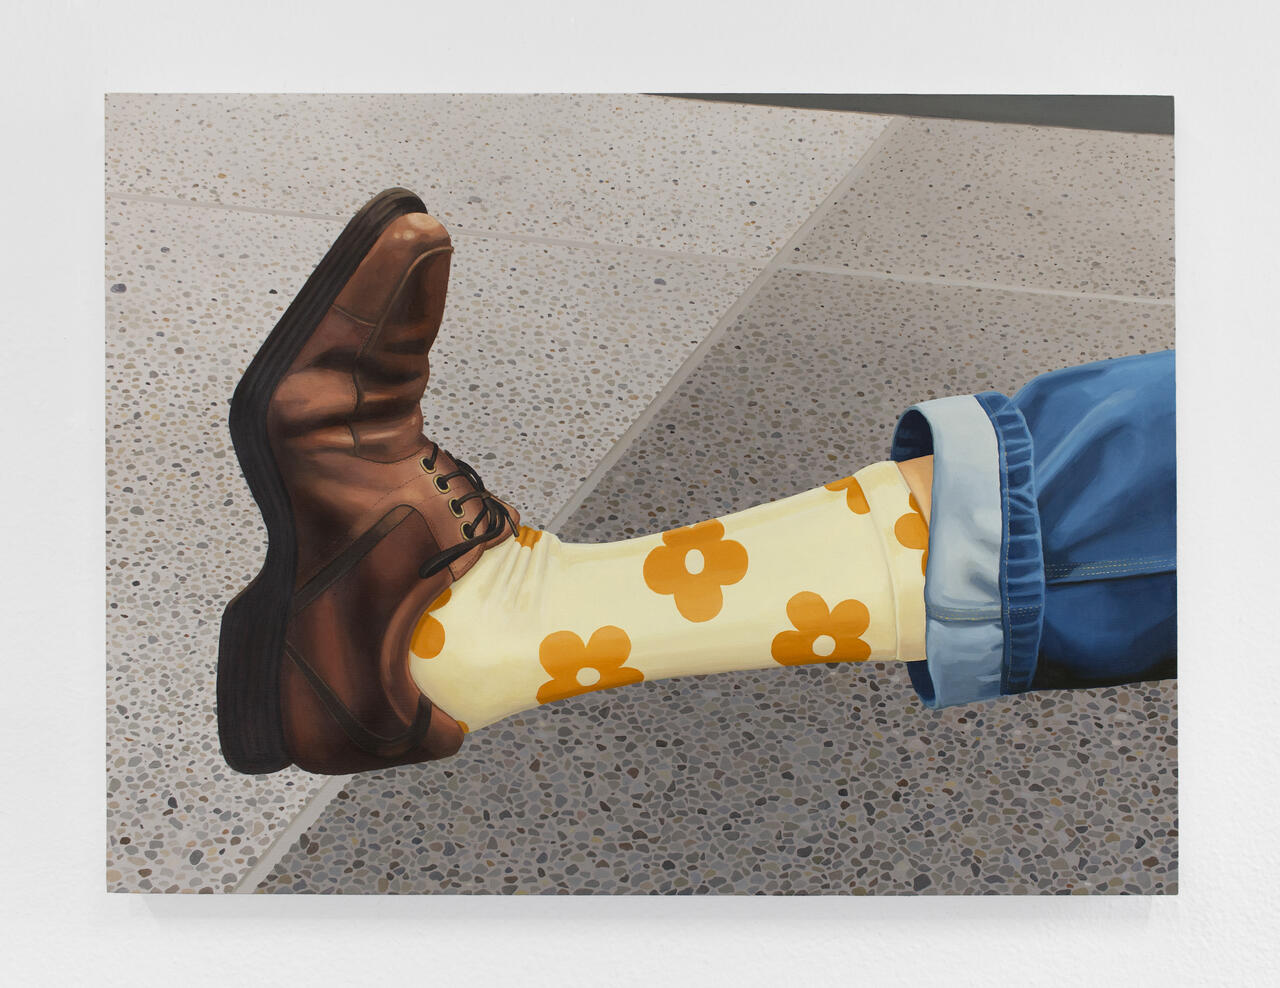 A painting of a leg above a concrete floor background with the end of a jean leg, a yellow flowered sock and a brown shoe.